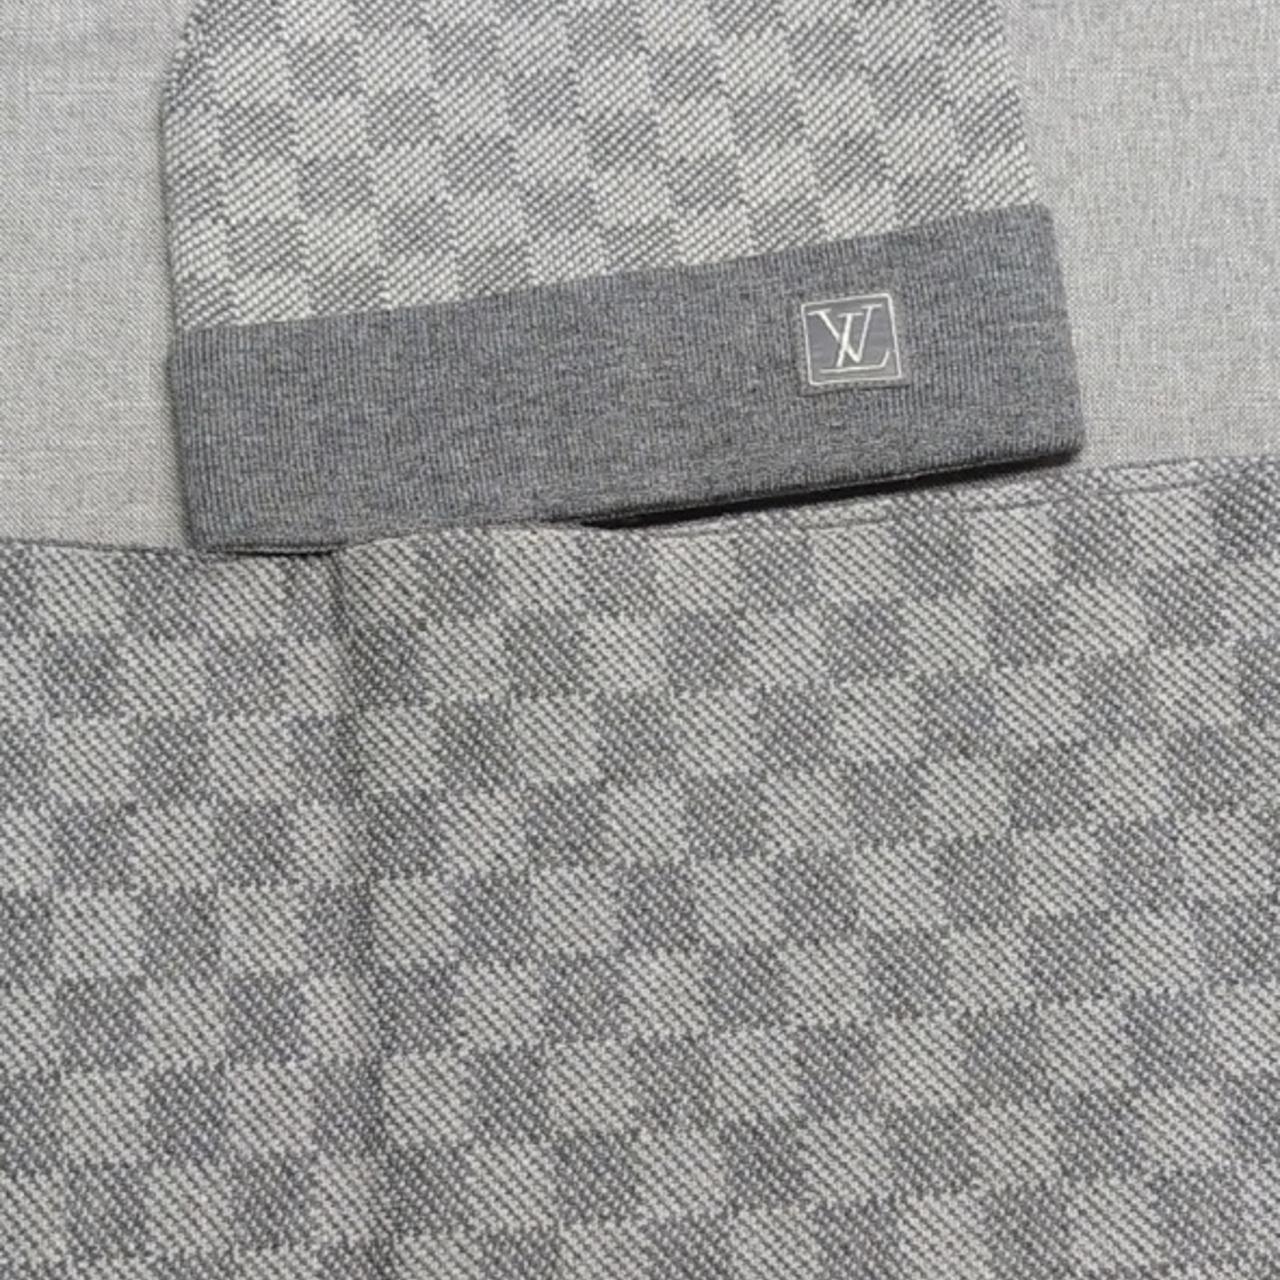 Mens Louis Vuitton Hat and Scarf set., Can do deals